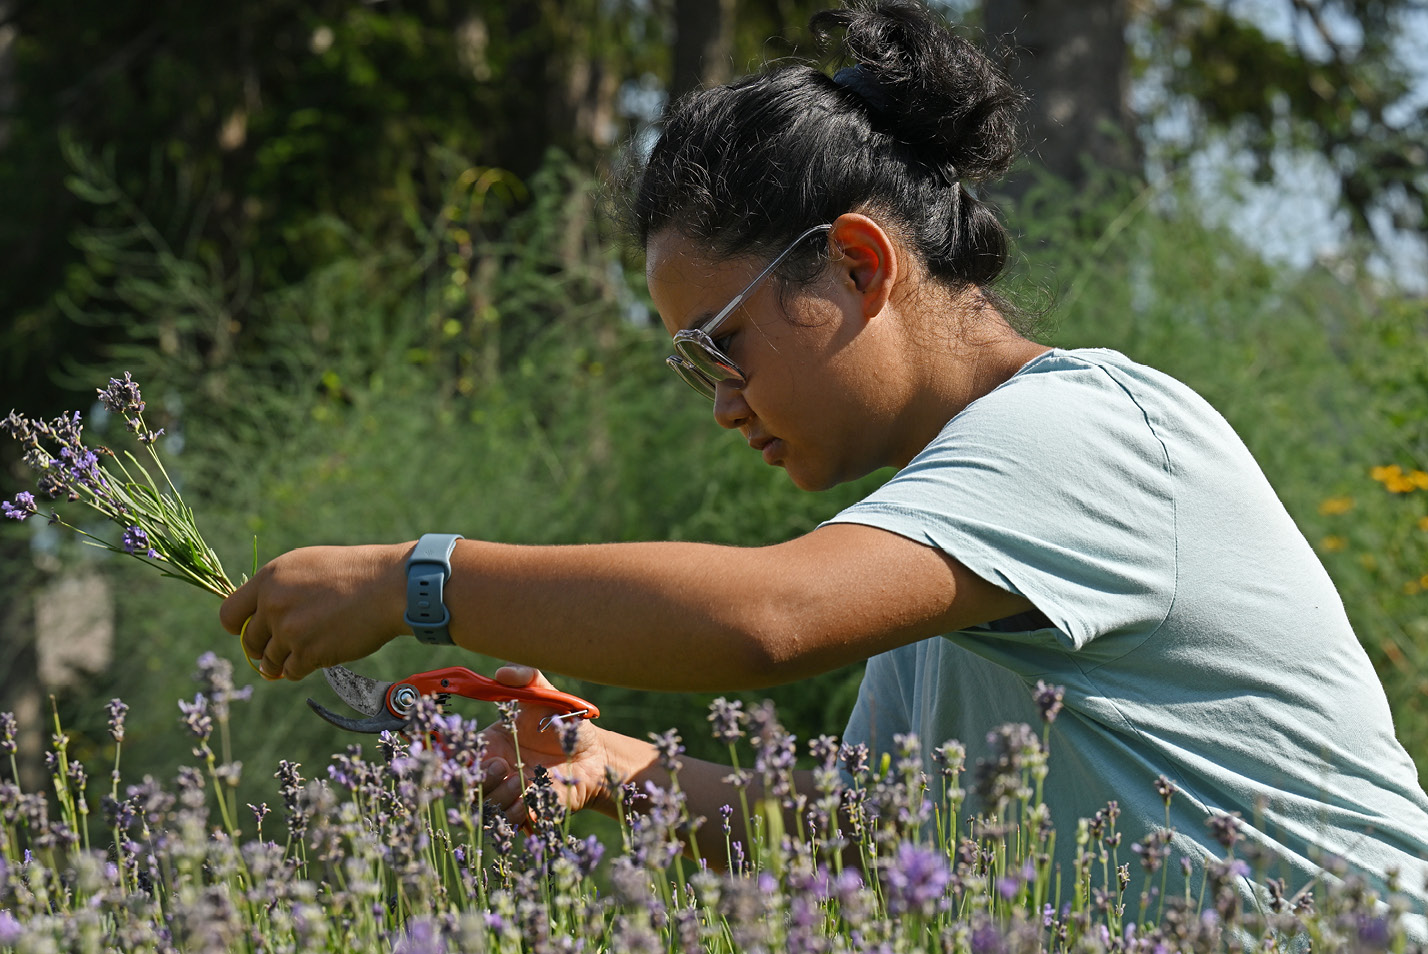 A student harvests lavender in the Sprout garden